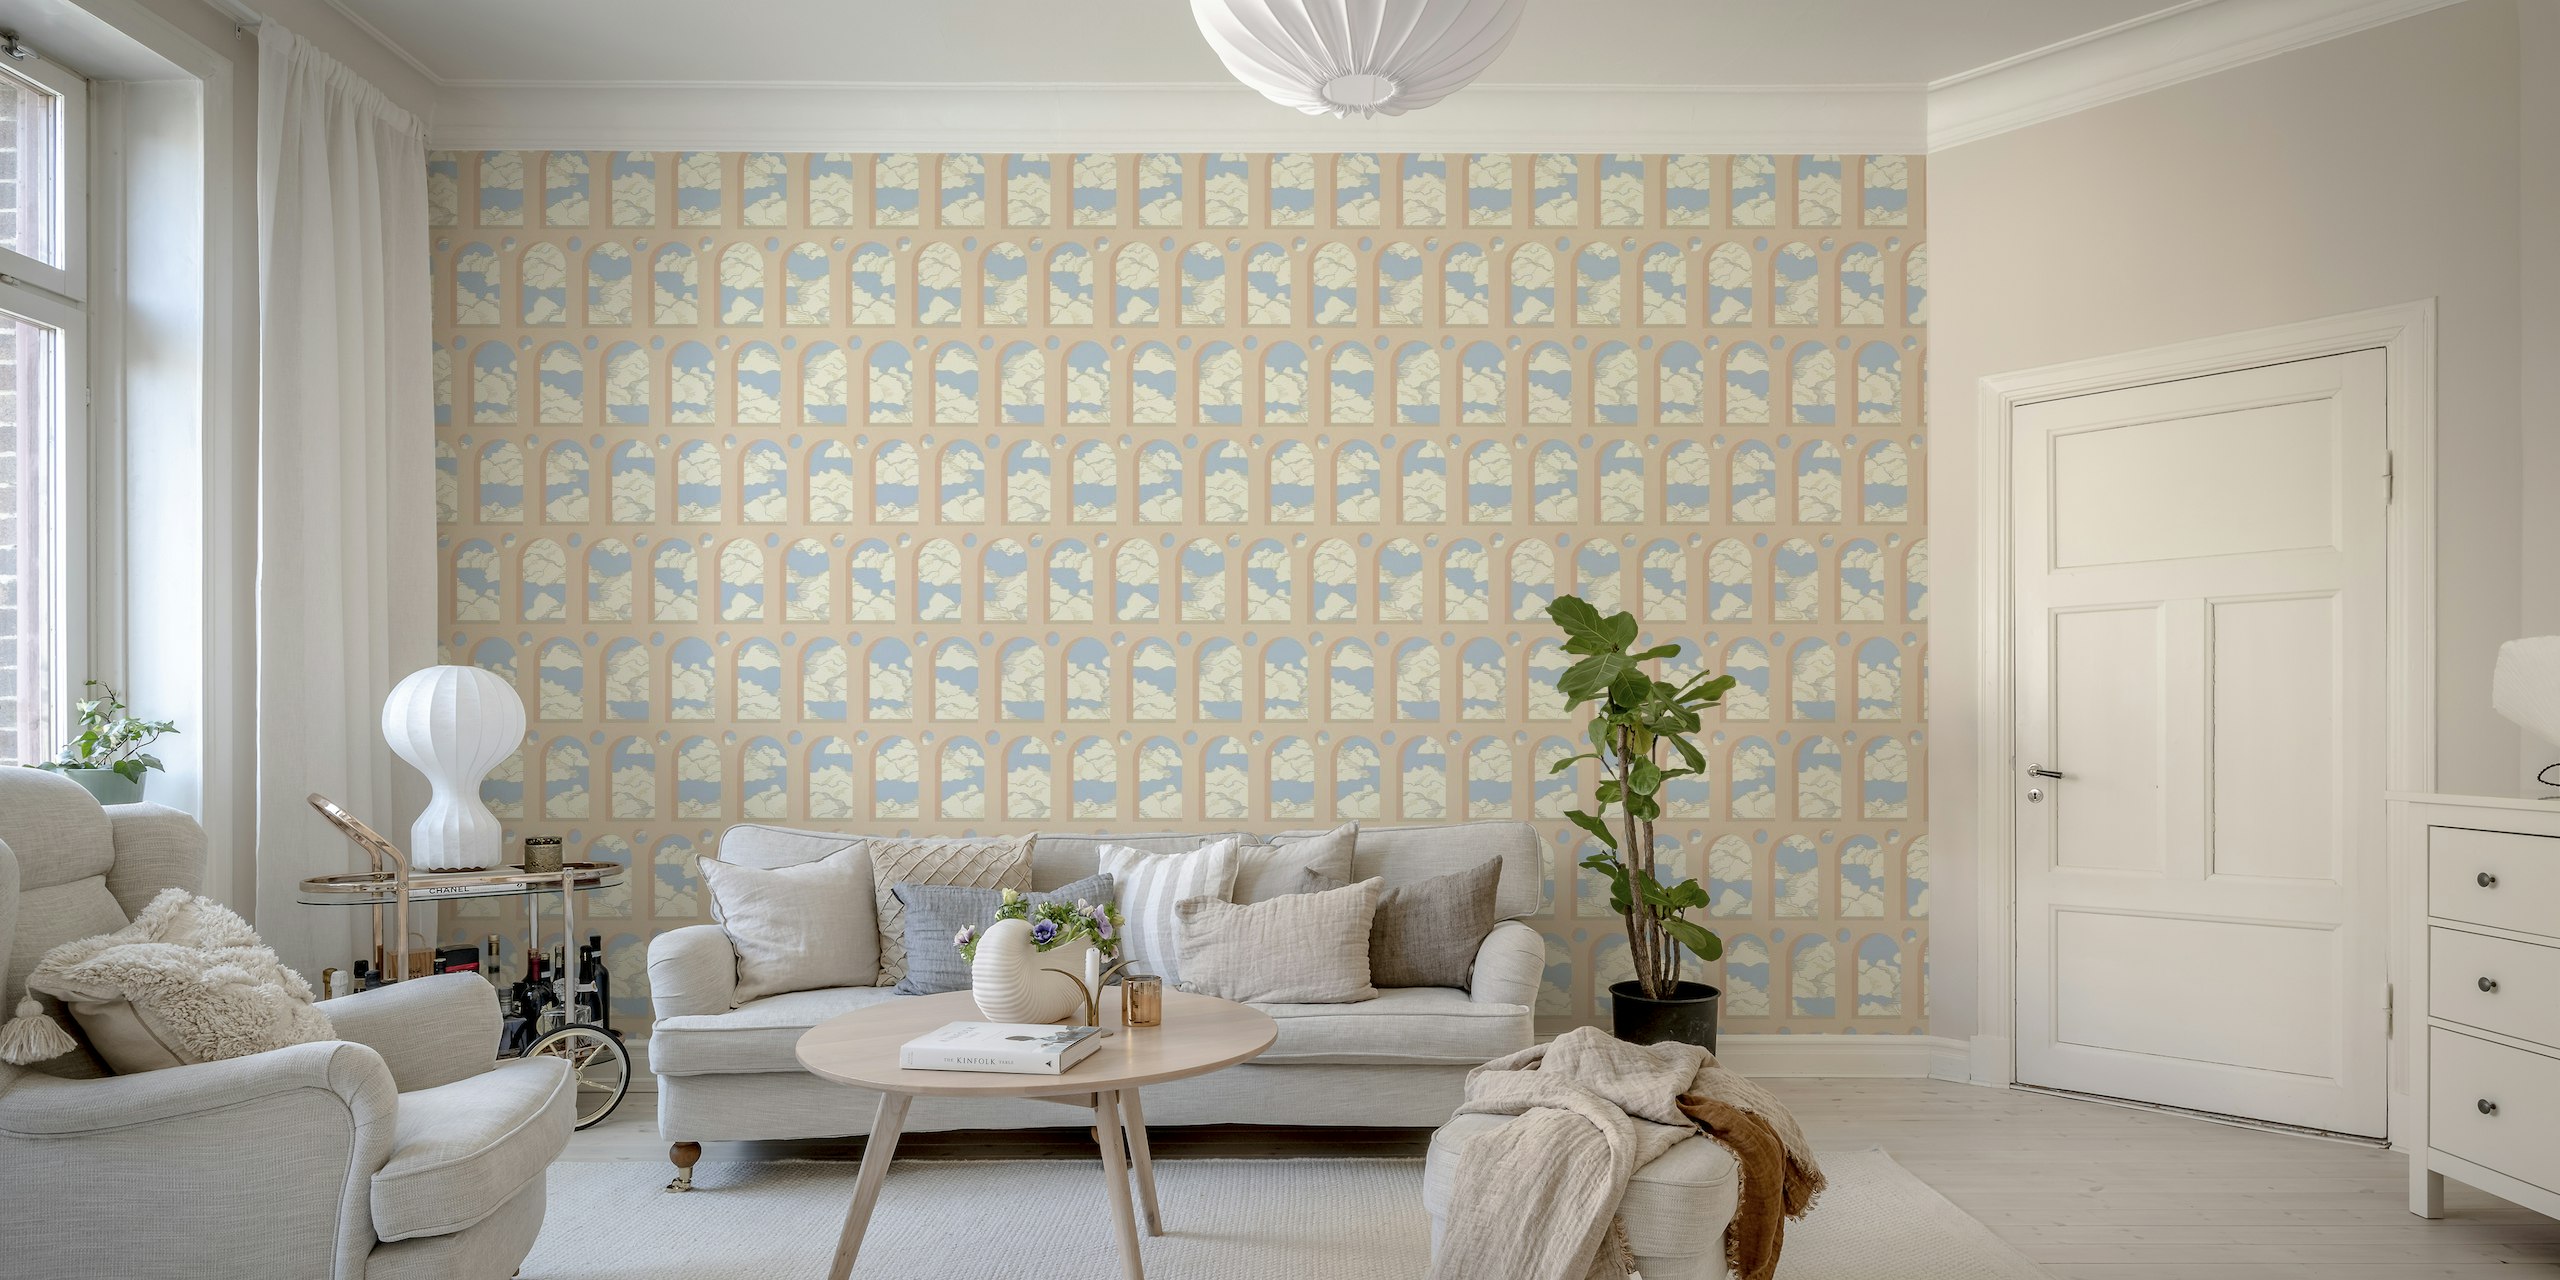 Arches depicting cloudy skies wall mural in neutral and blue tones